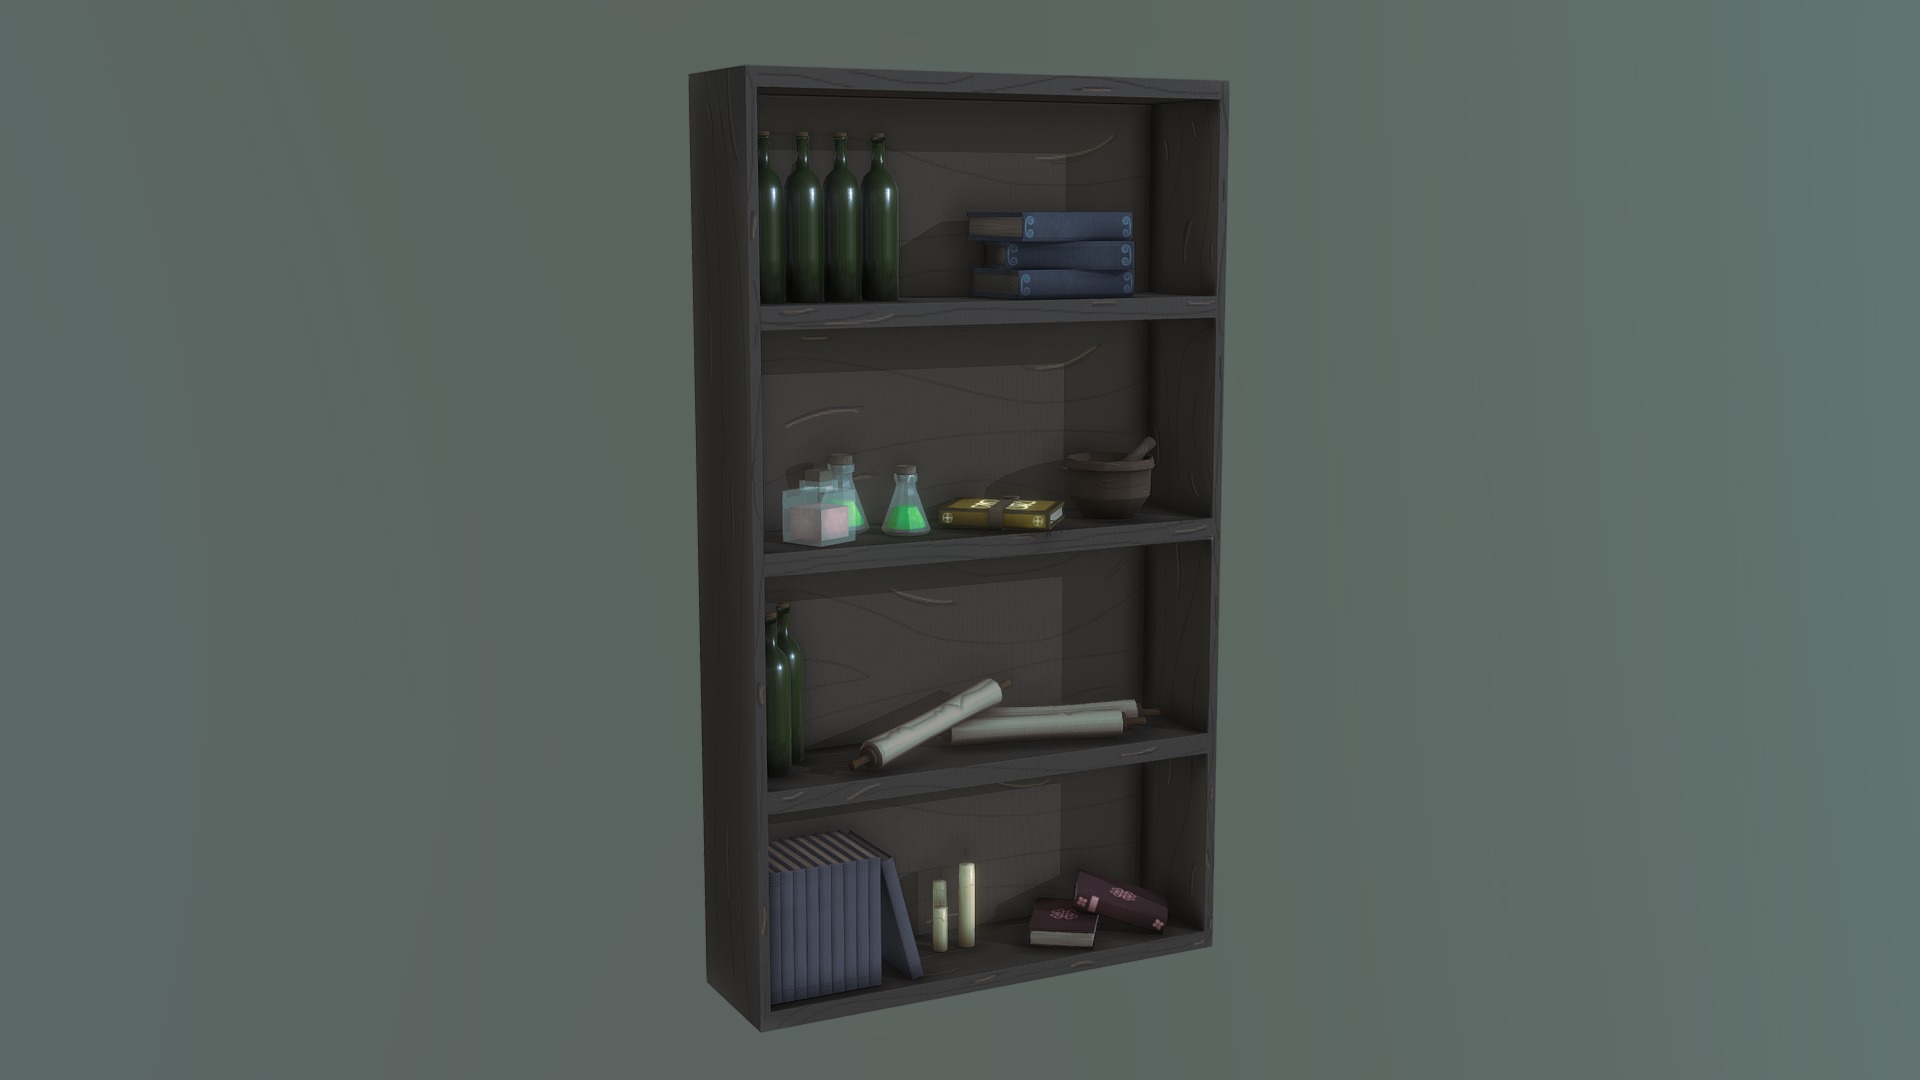 3D model Magic shelving - This is a 3D model of the Magic shelving. The 3D model is about a shelf with bottles and other objects on it.